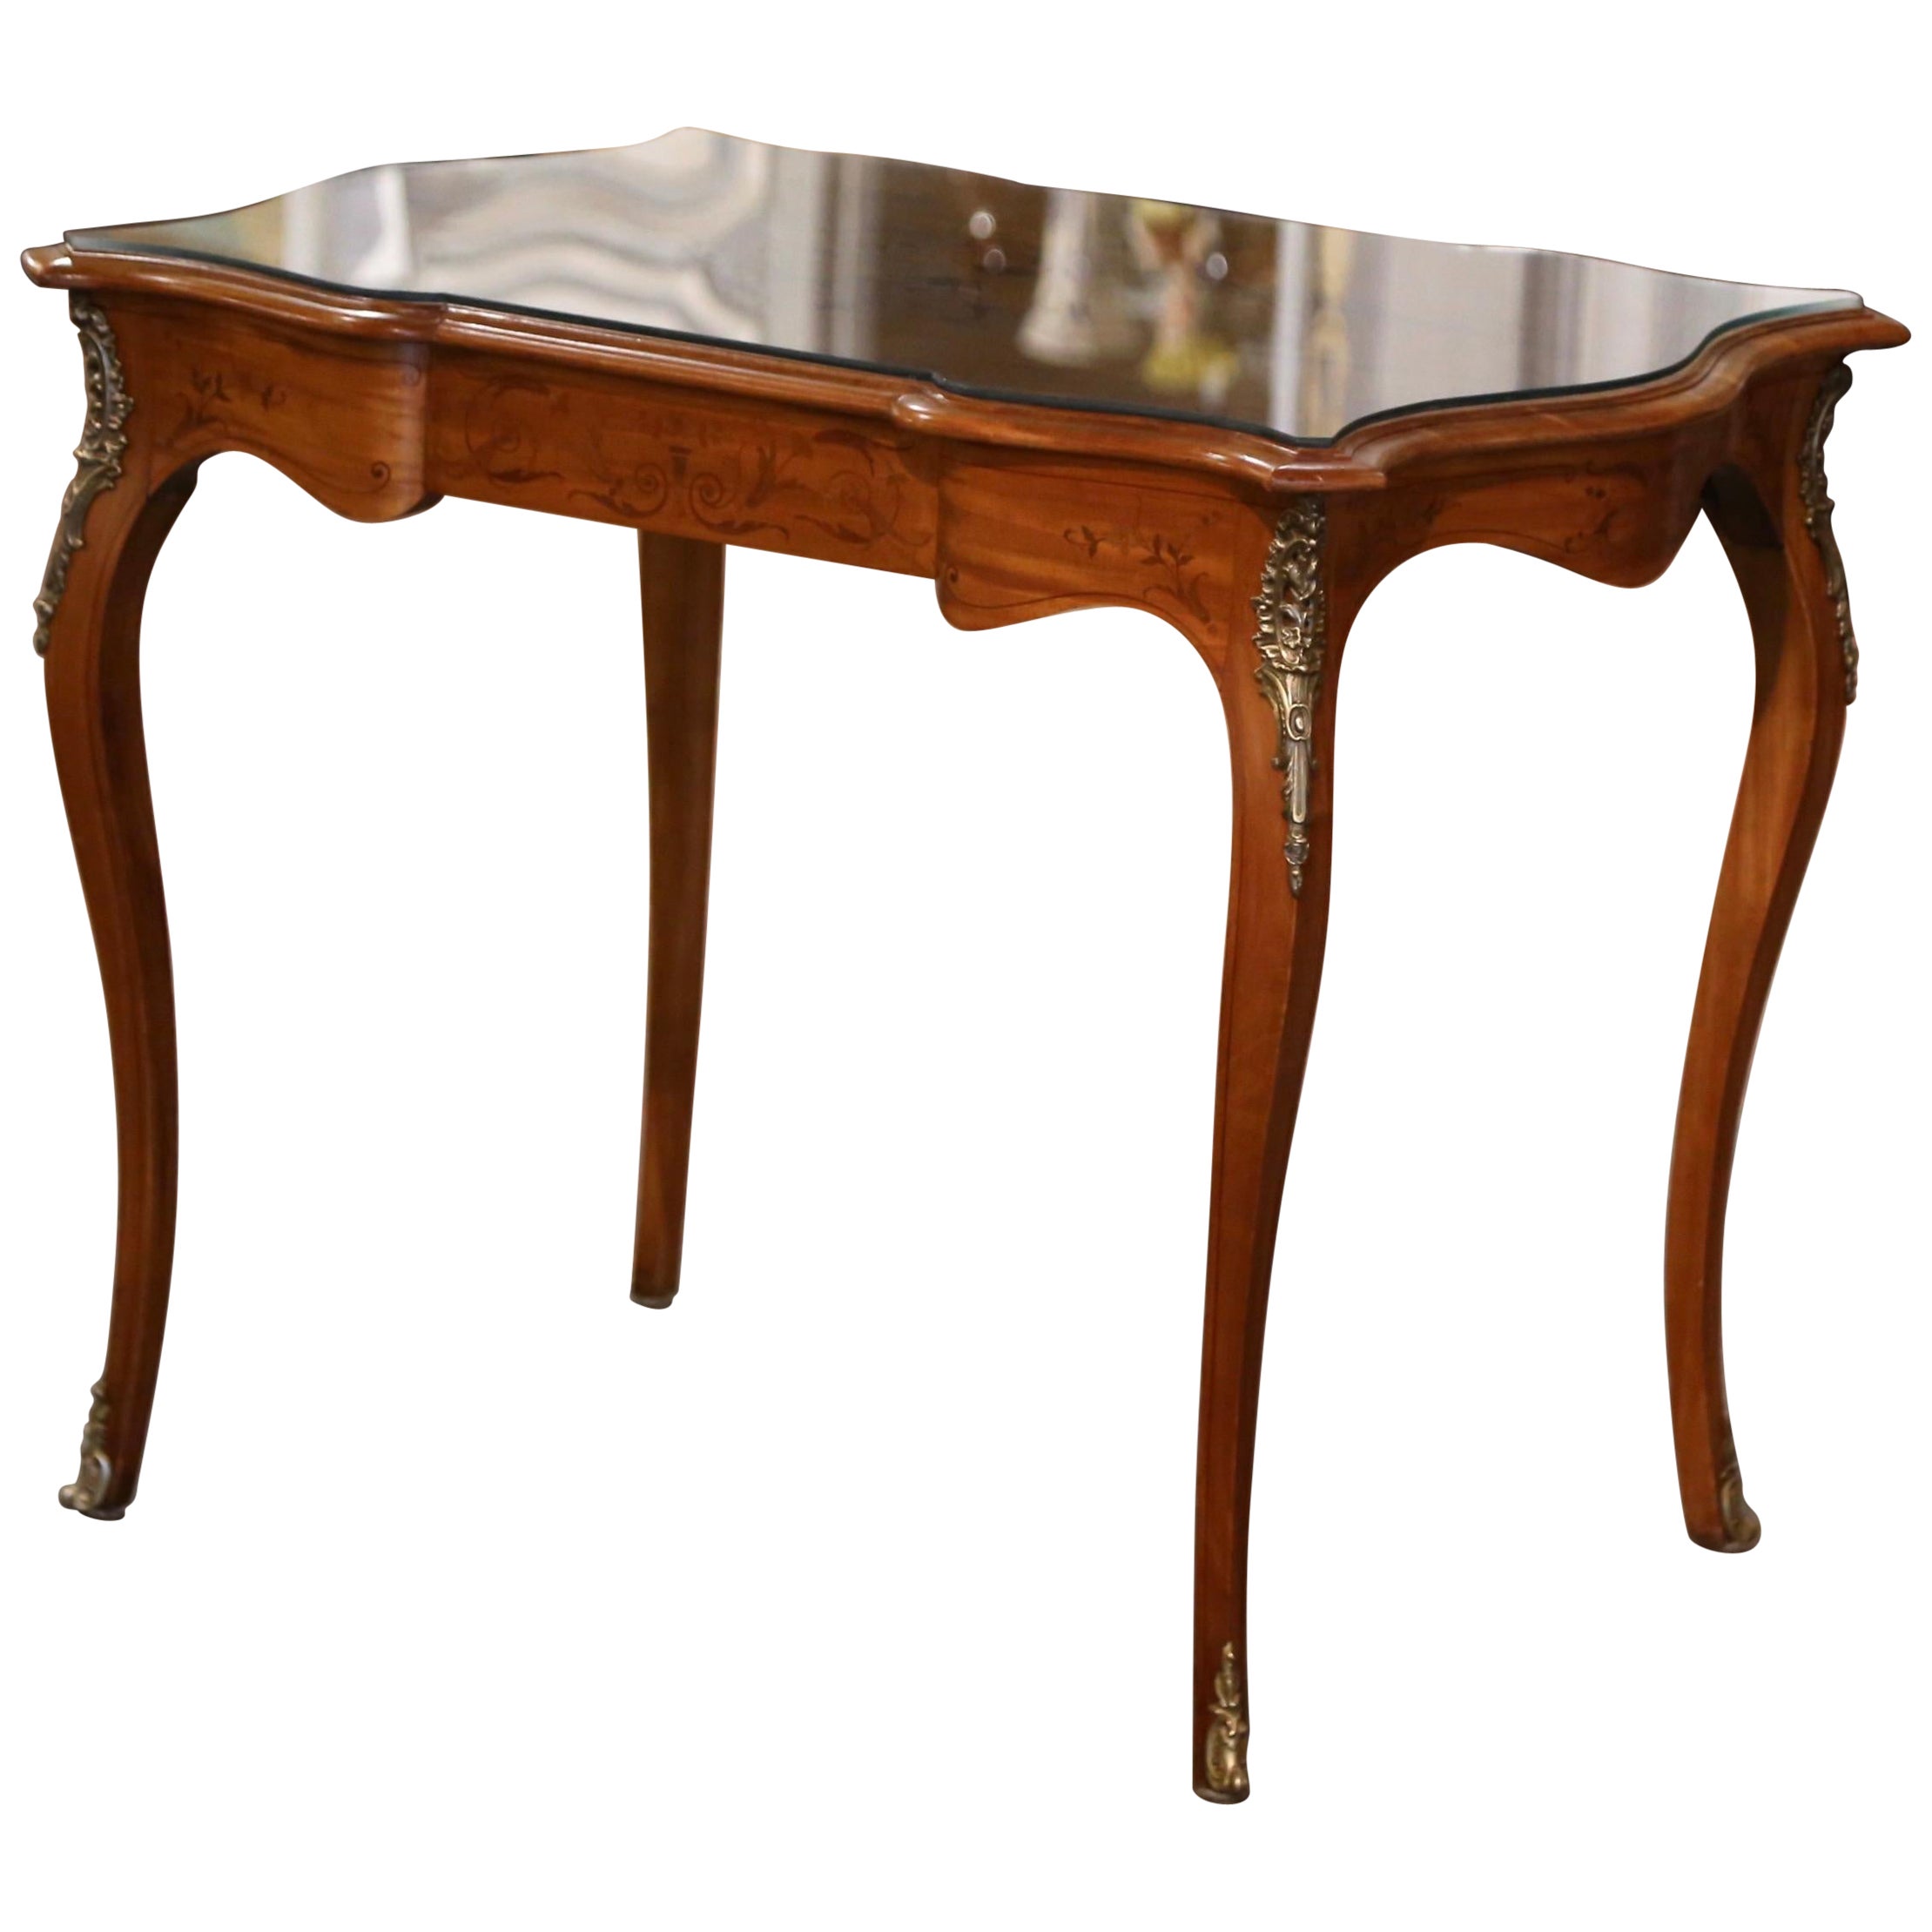 Early 20th Century French Louis XV Inlaid Walnut Table with Protective Glass  For Sale